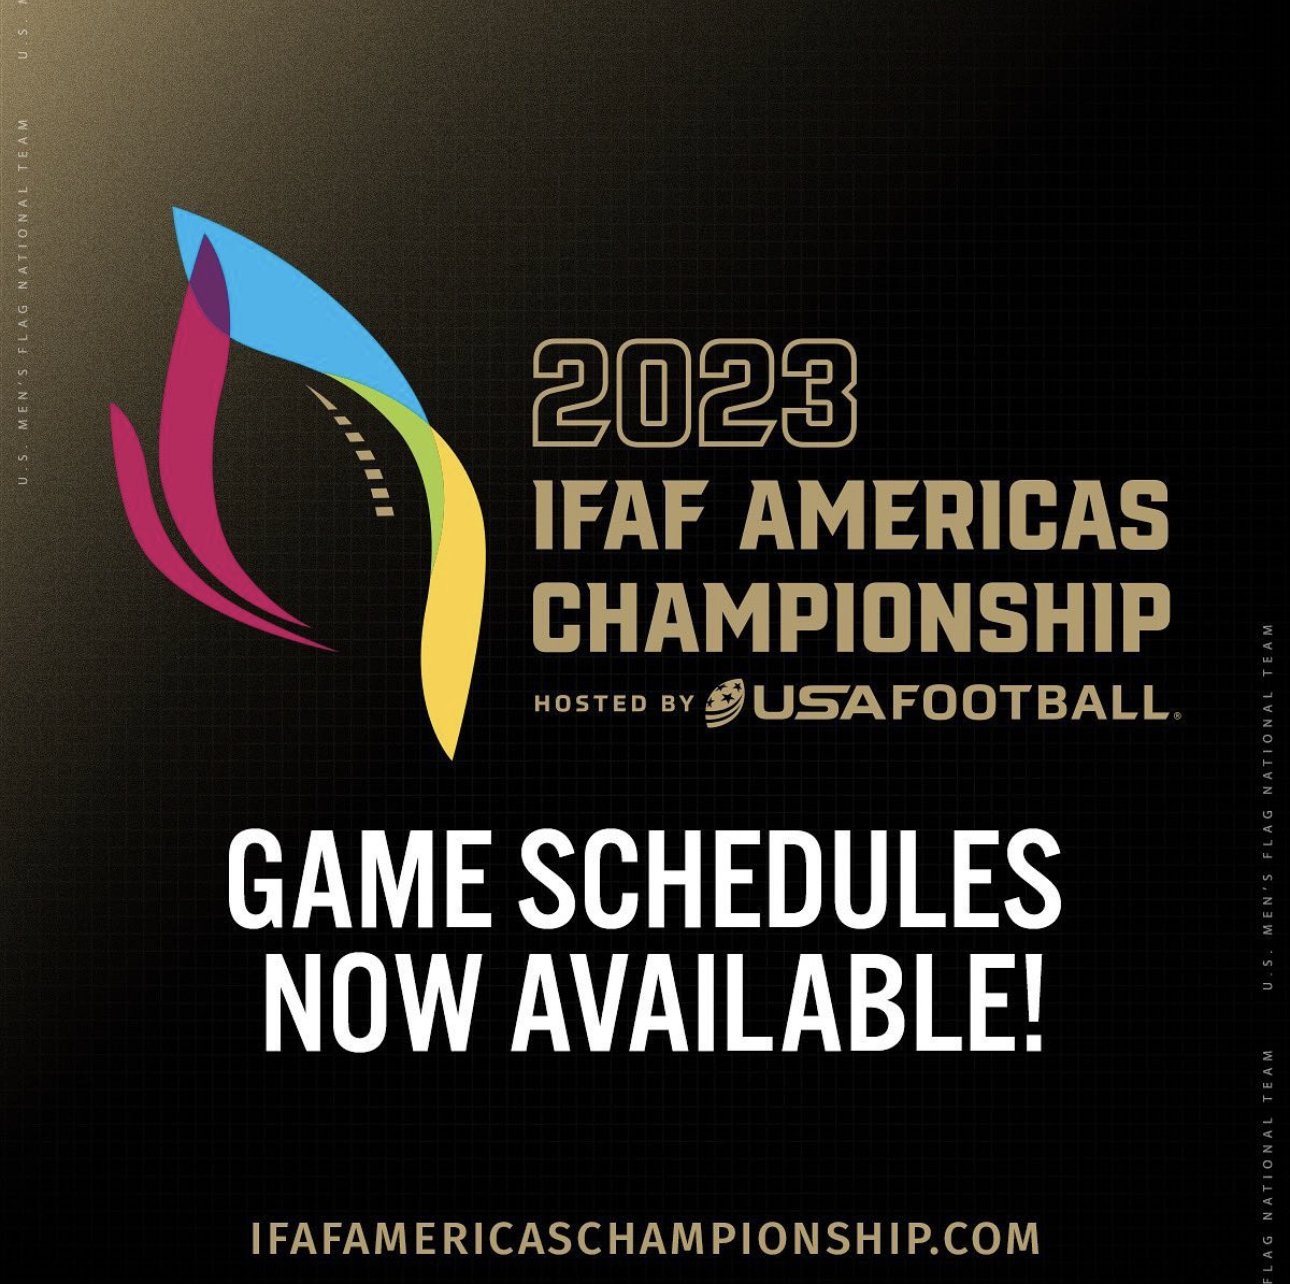 Exciting Showdown at the 2023 IFAF Americas Continental Flag Football Championship